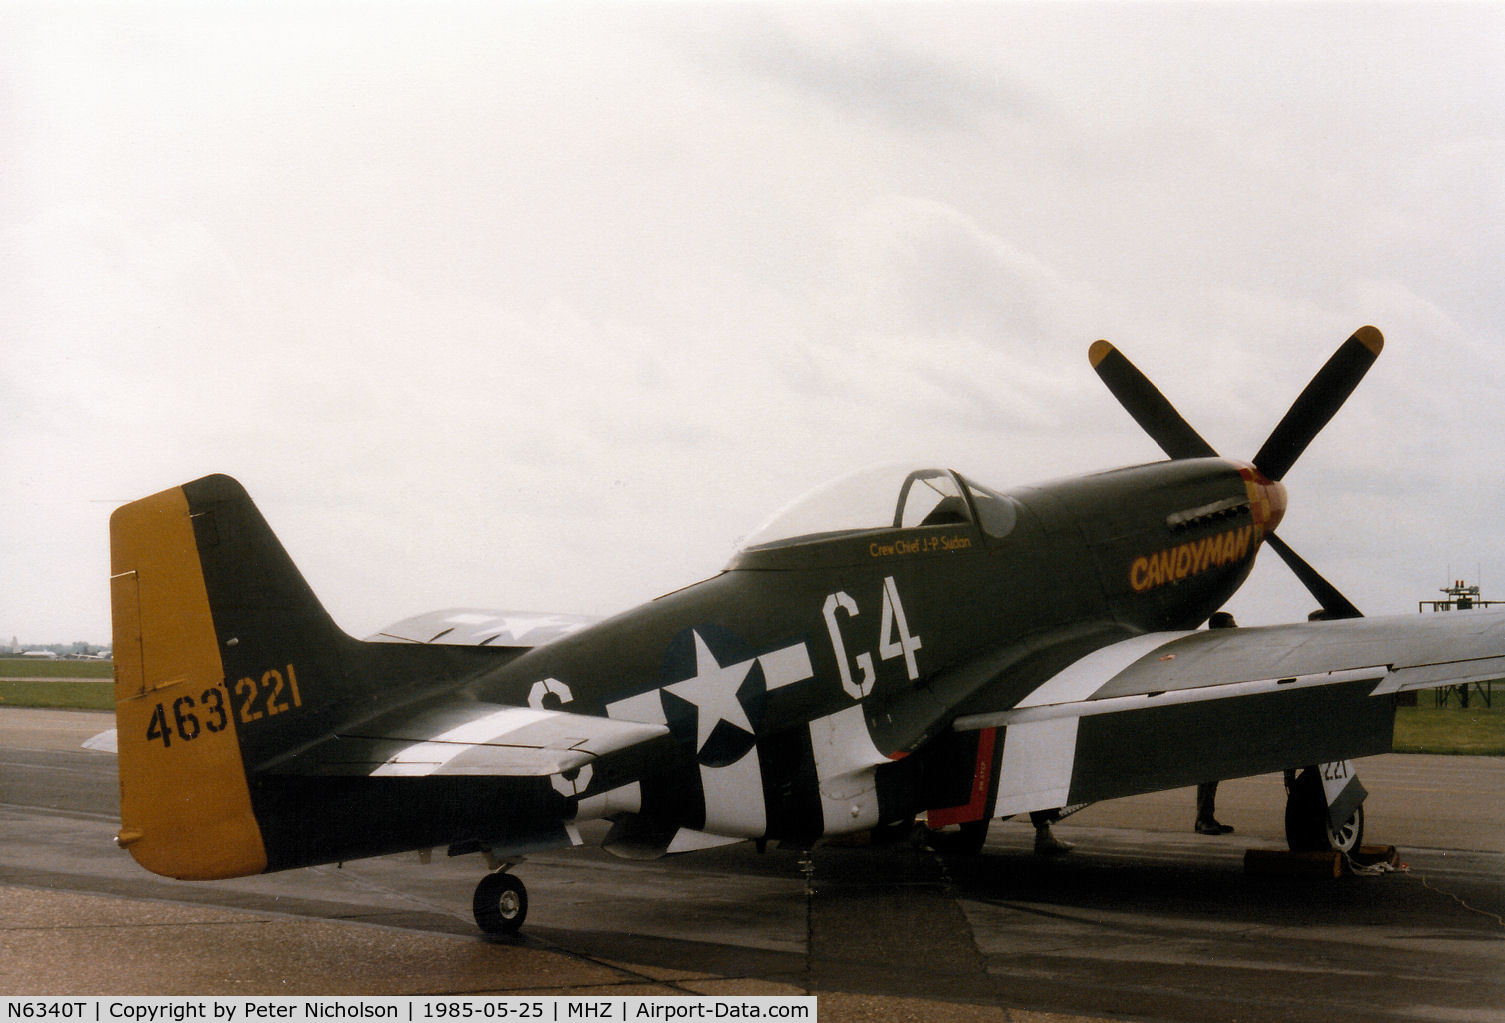 N6340T, 1944 North American P-51D Mustang C/N 122-39608, Another view of P-51D Mustang 44-63221 on display at the 1985 RAF Mildenhall Air Fete.